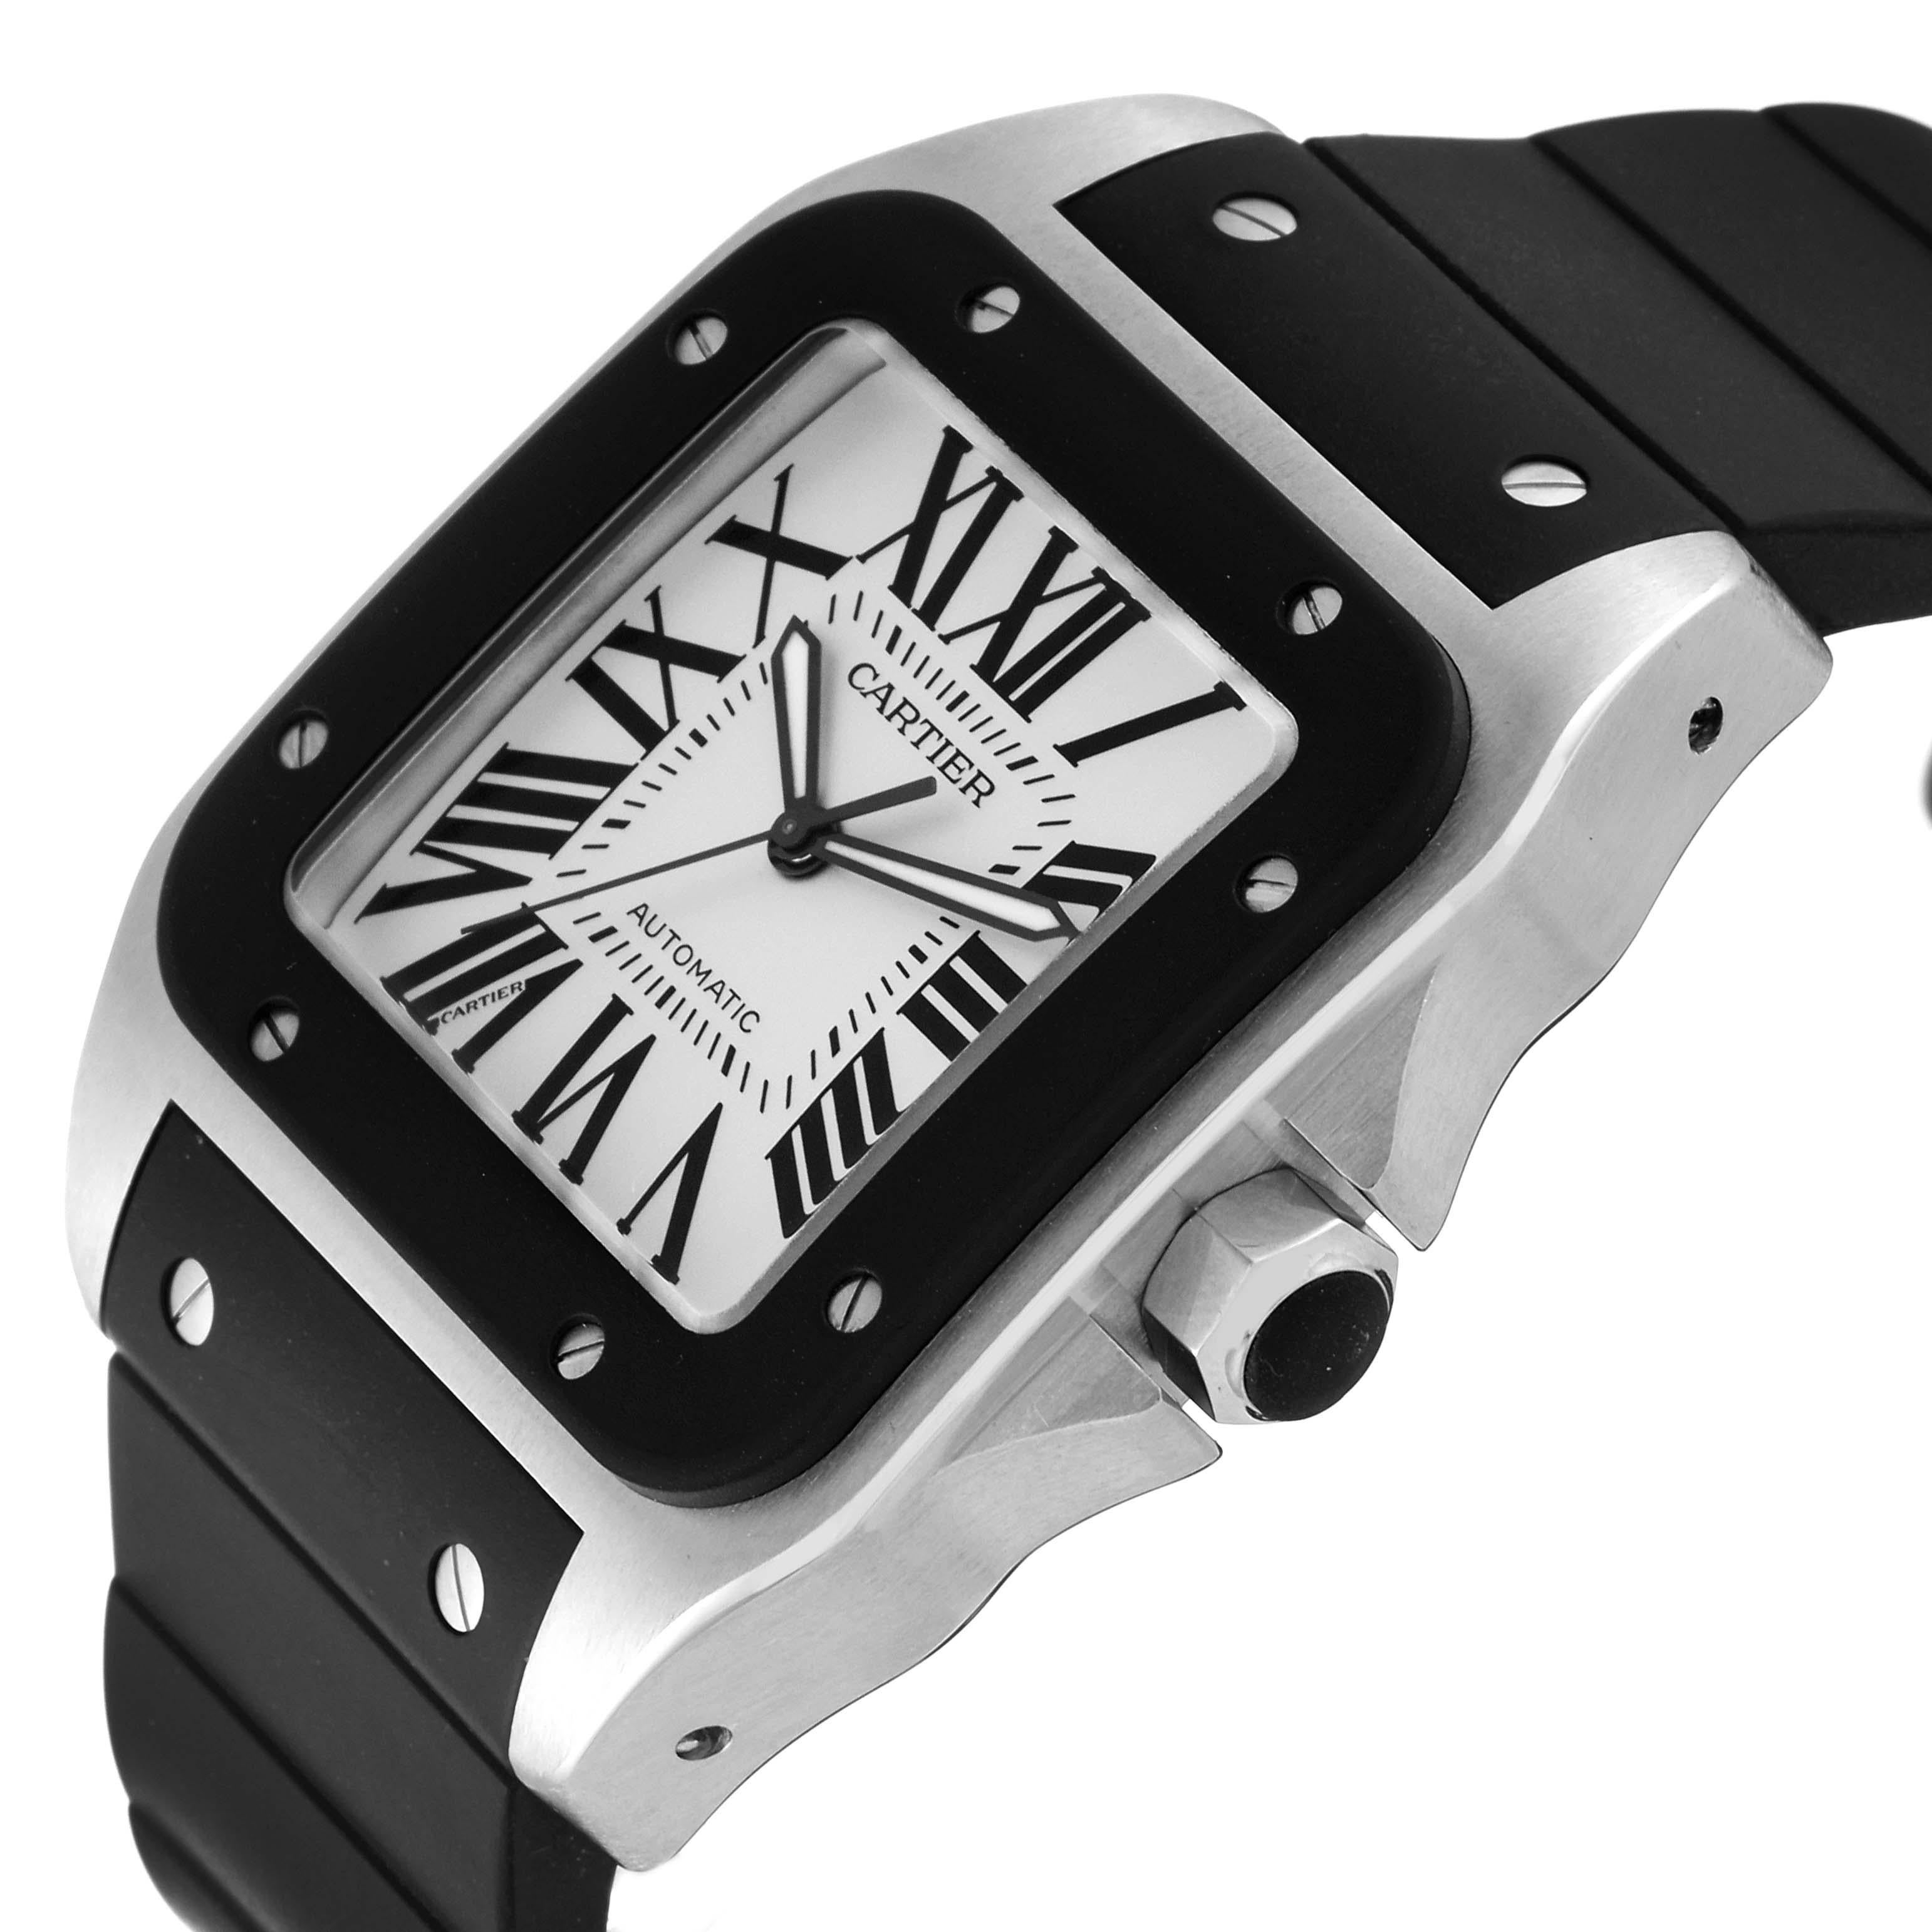 Cartier Santos 100 Steel Black Rubber Strap Mens Watch W20121U2 Papers. Automatic self-winding movement caliber 049. Three body brushed stainless steel case 38 mm. Protected octagonal crown set with black rubber. Black rubber bezel punctuated with 8